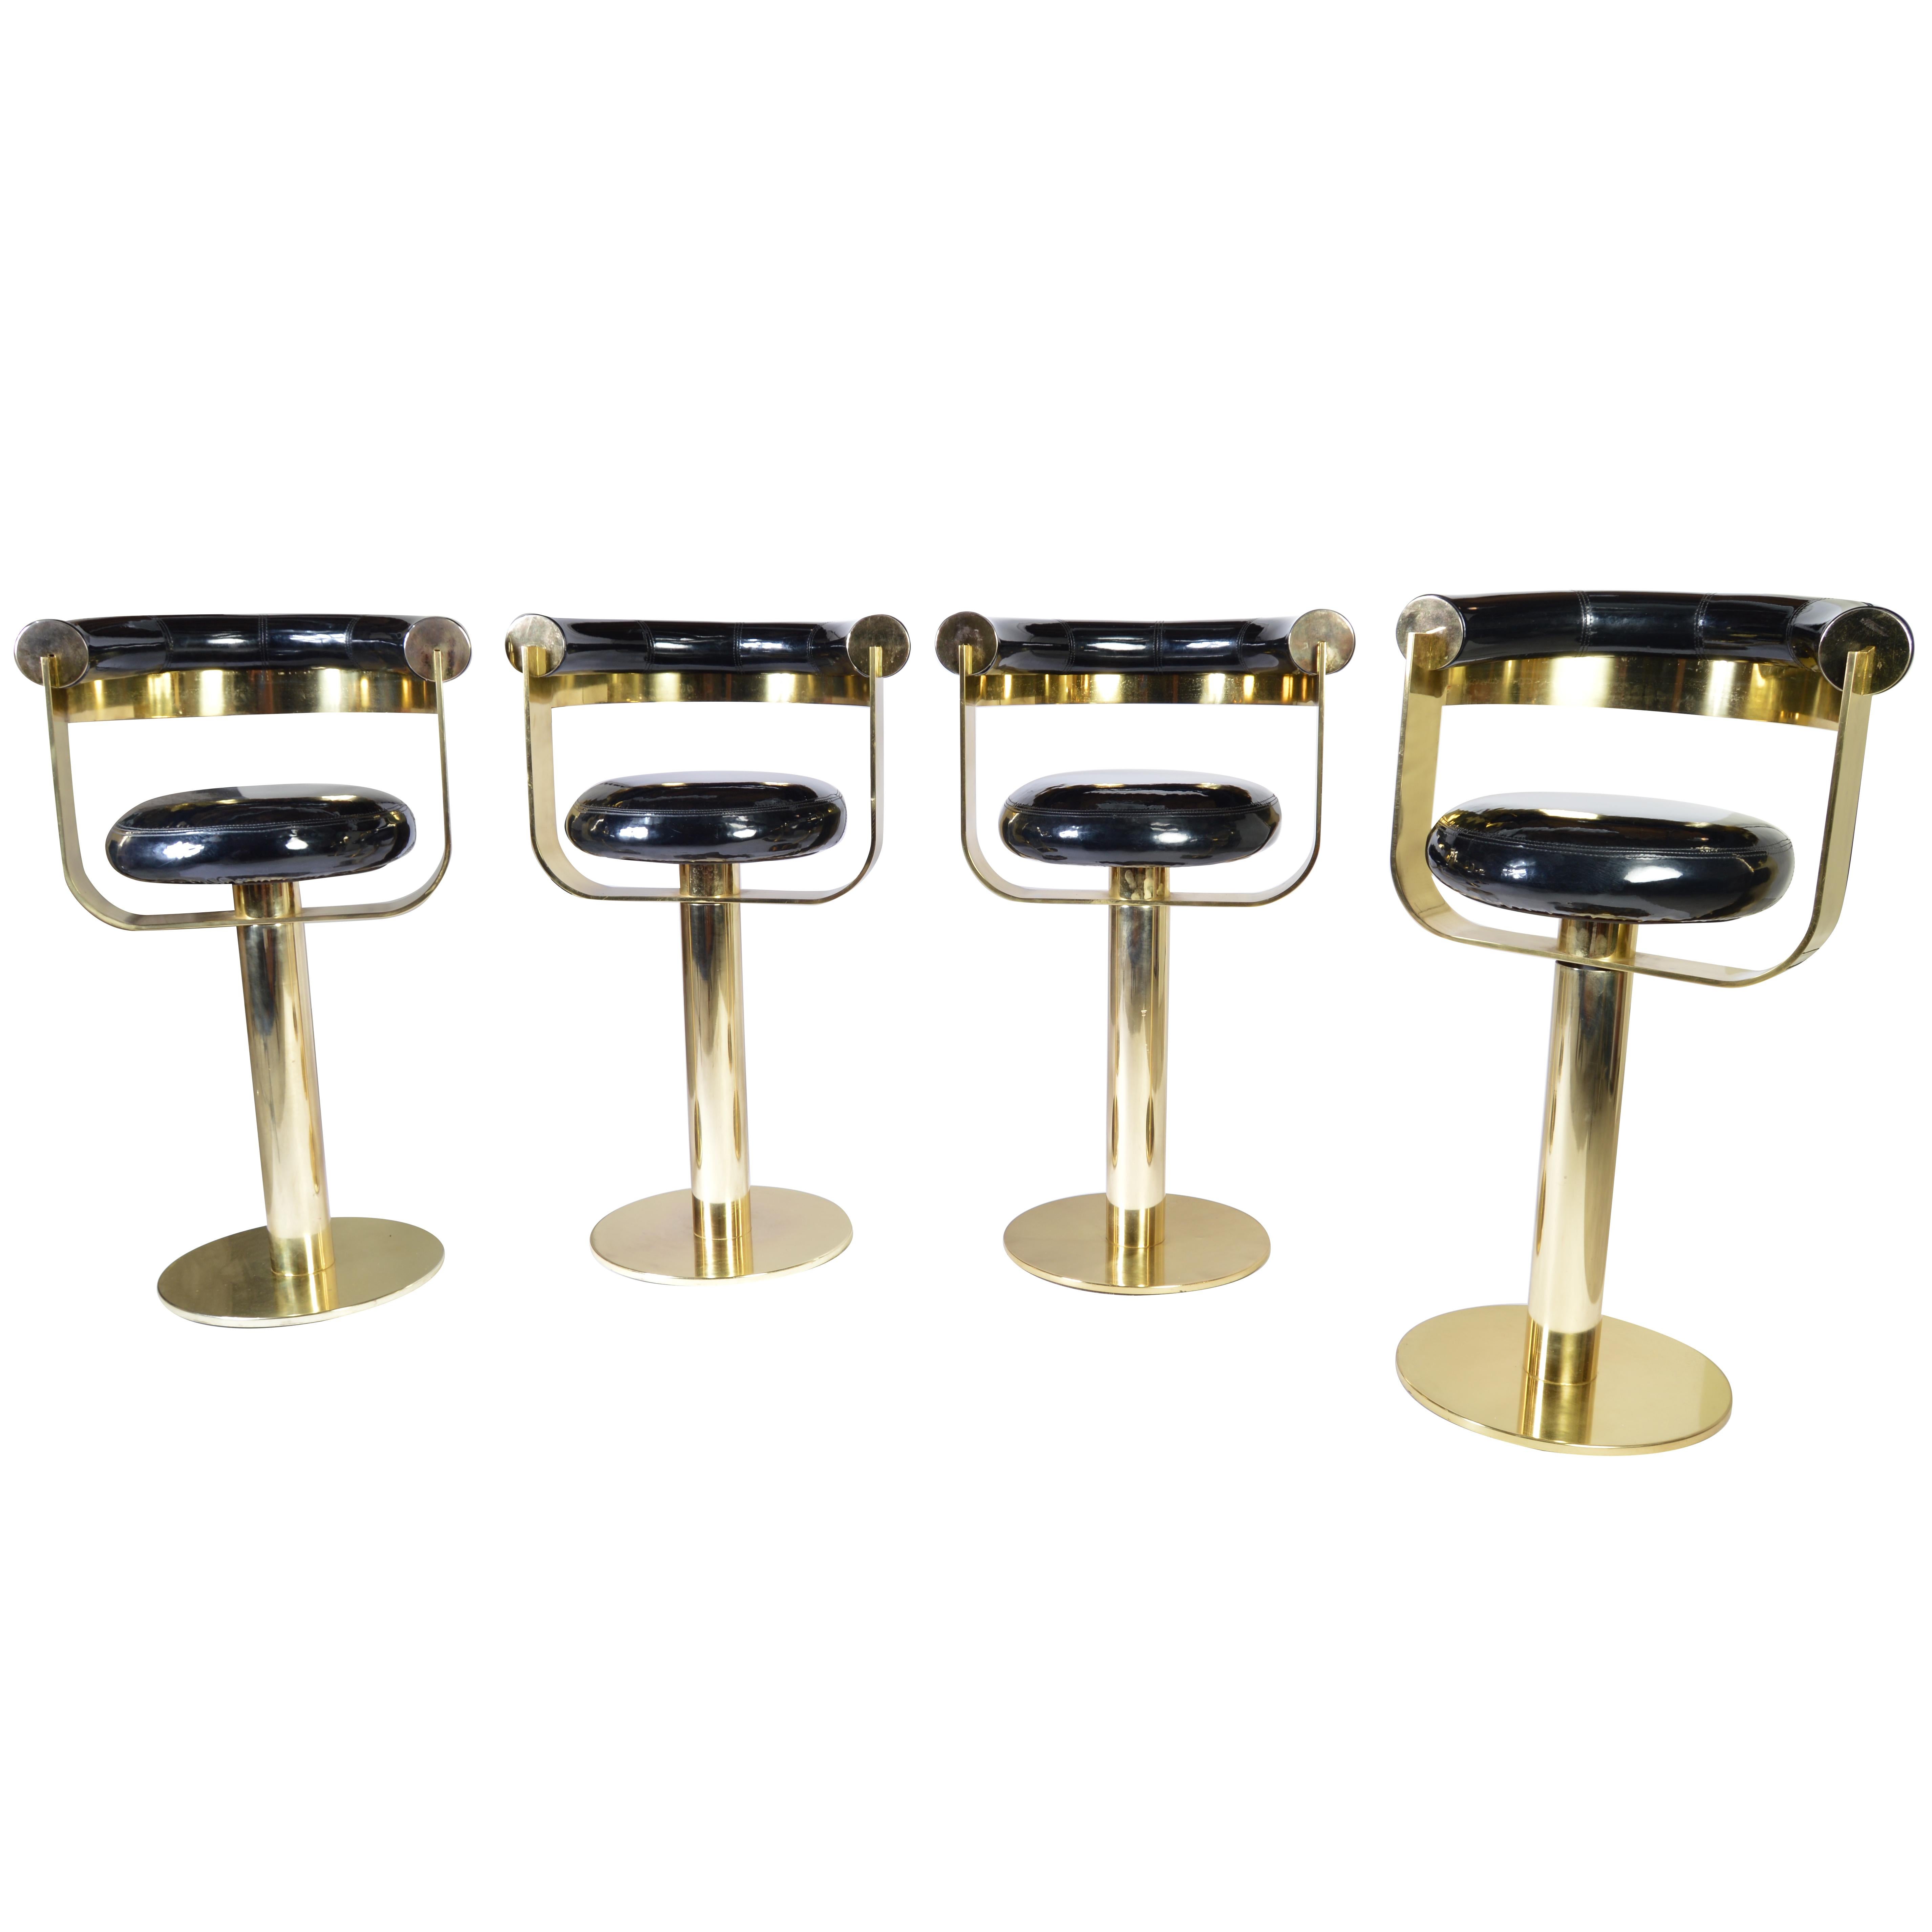 A set of 4 brass designer counter bar stools custom designed in 1973 for an installation in Elkins Park, PA. In phenomenal vintage condition having high gloss vinyl seats, polished brass frames with silent 360 pivoting motion. Each stool is